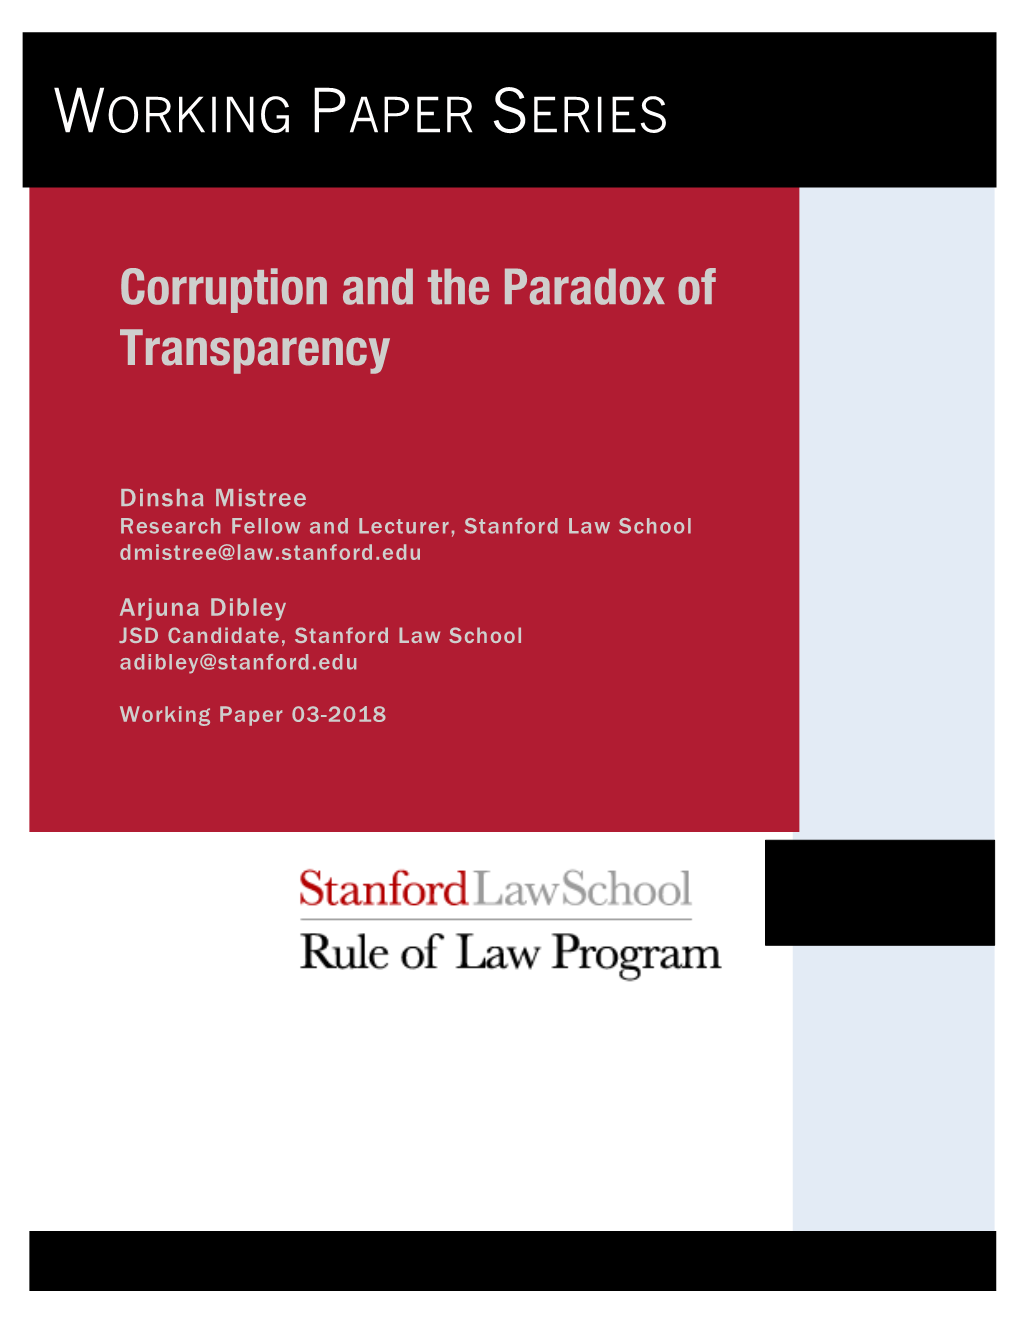 Corruption and the Paradox of Transparency